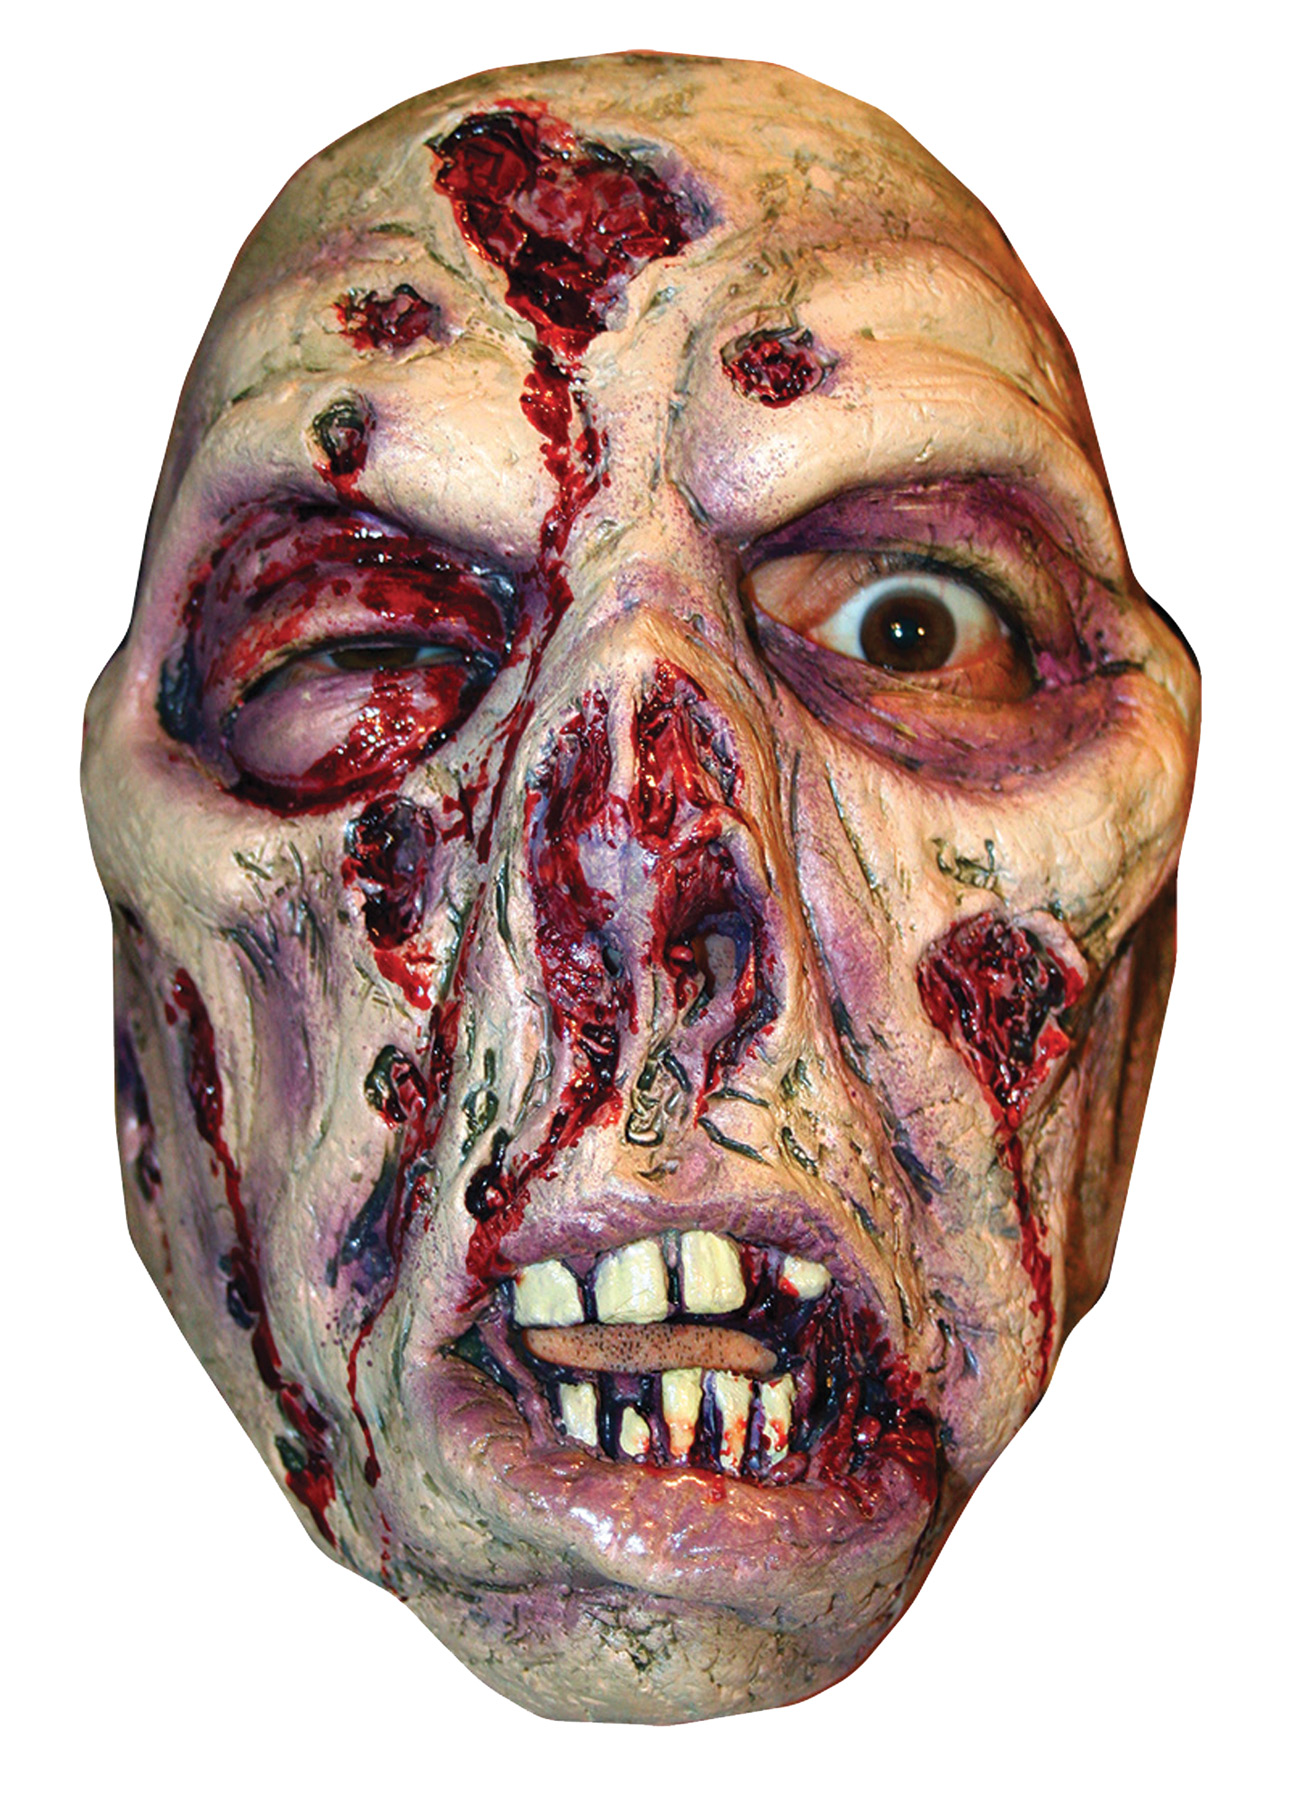 DECAYING WALKER ZOMBIE MASK